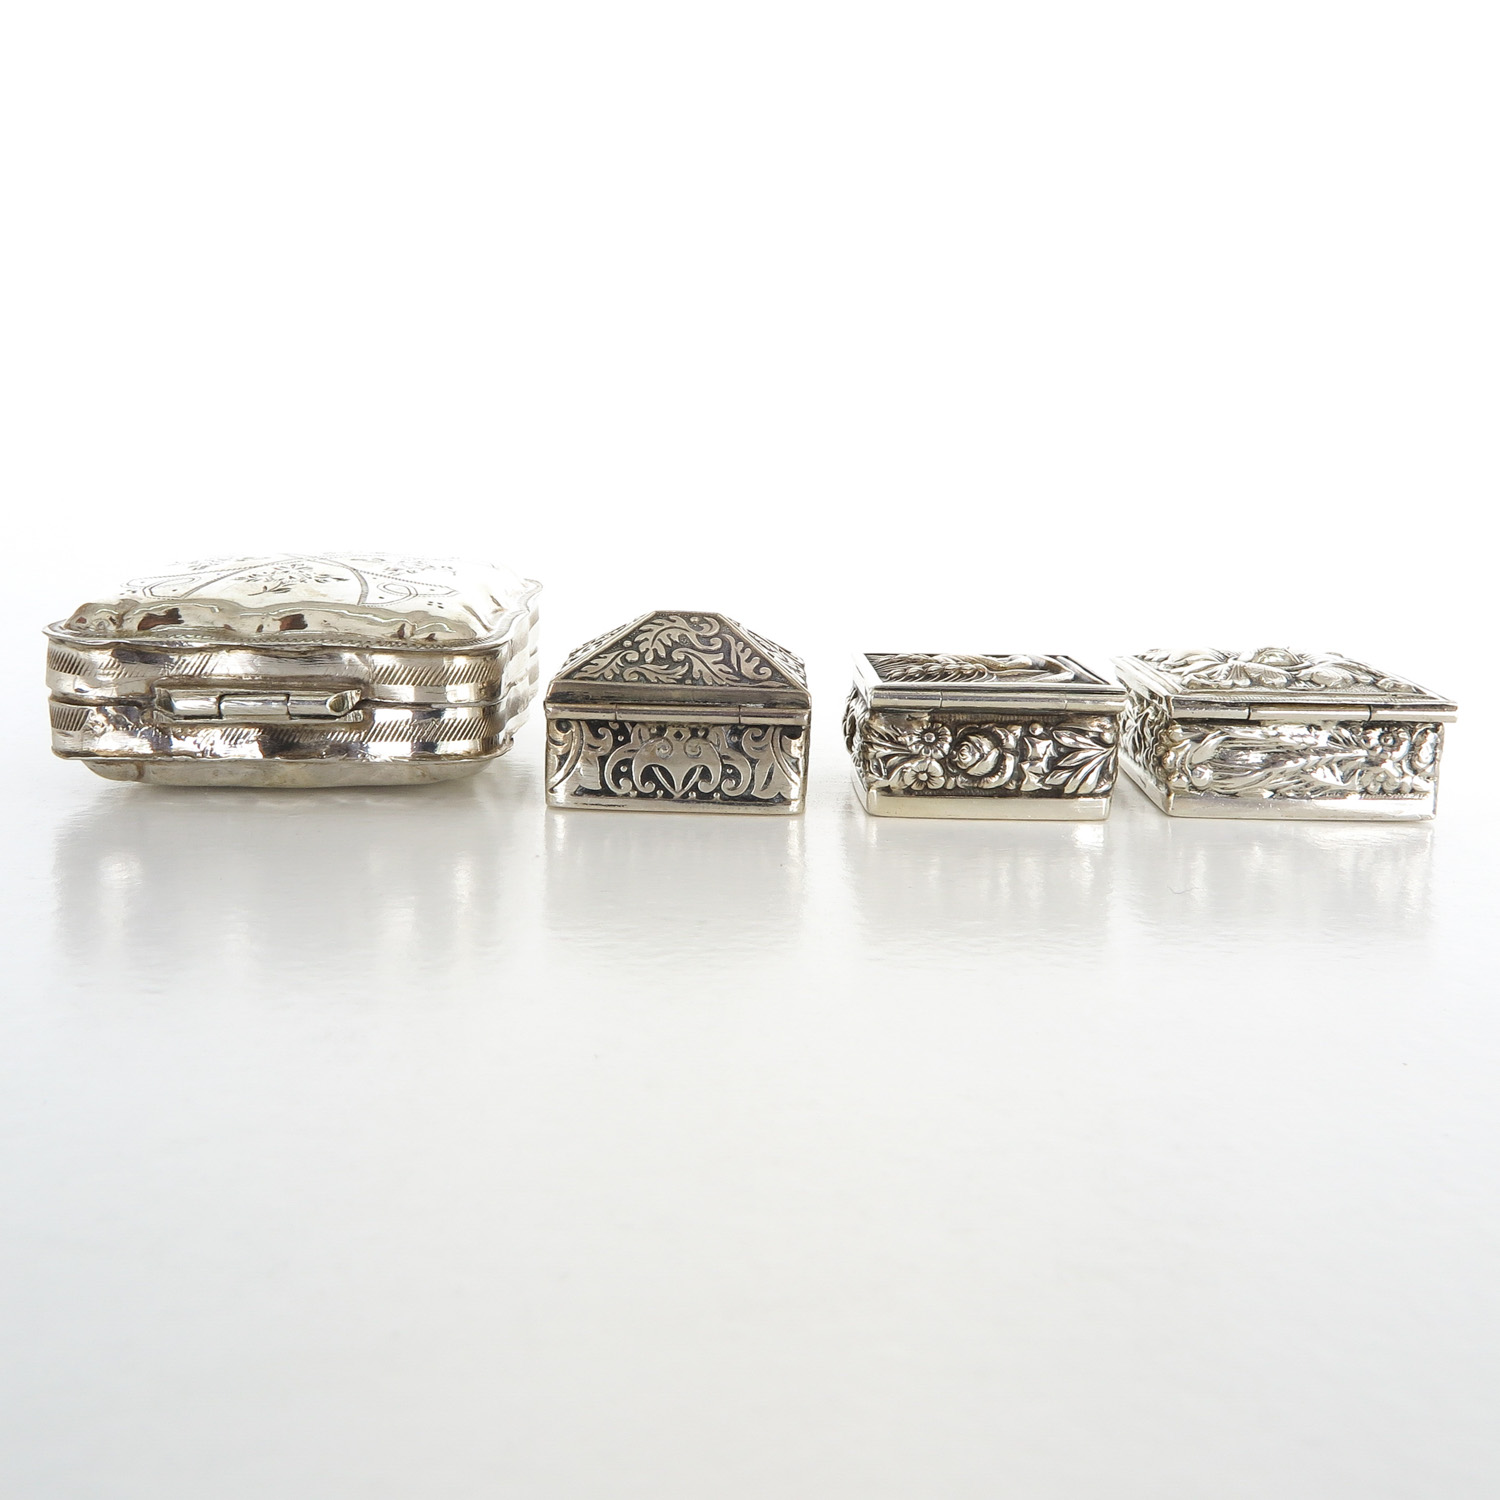 Lot of 4 Silver Pill Boxes - Image 3 of 6